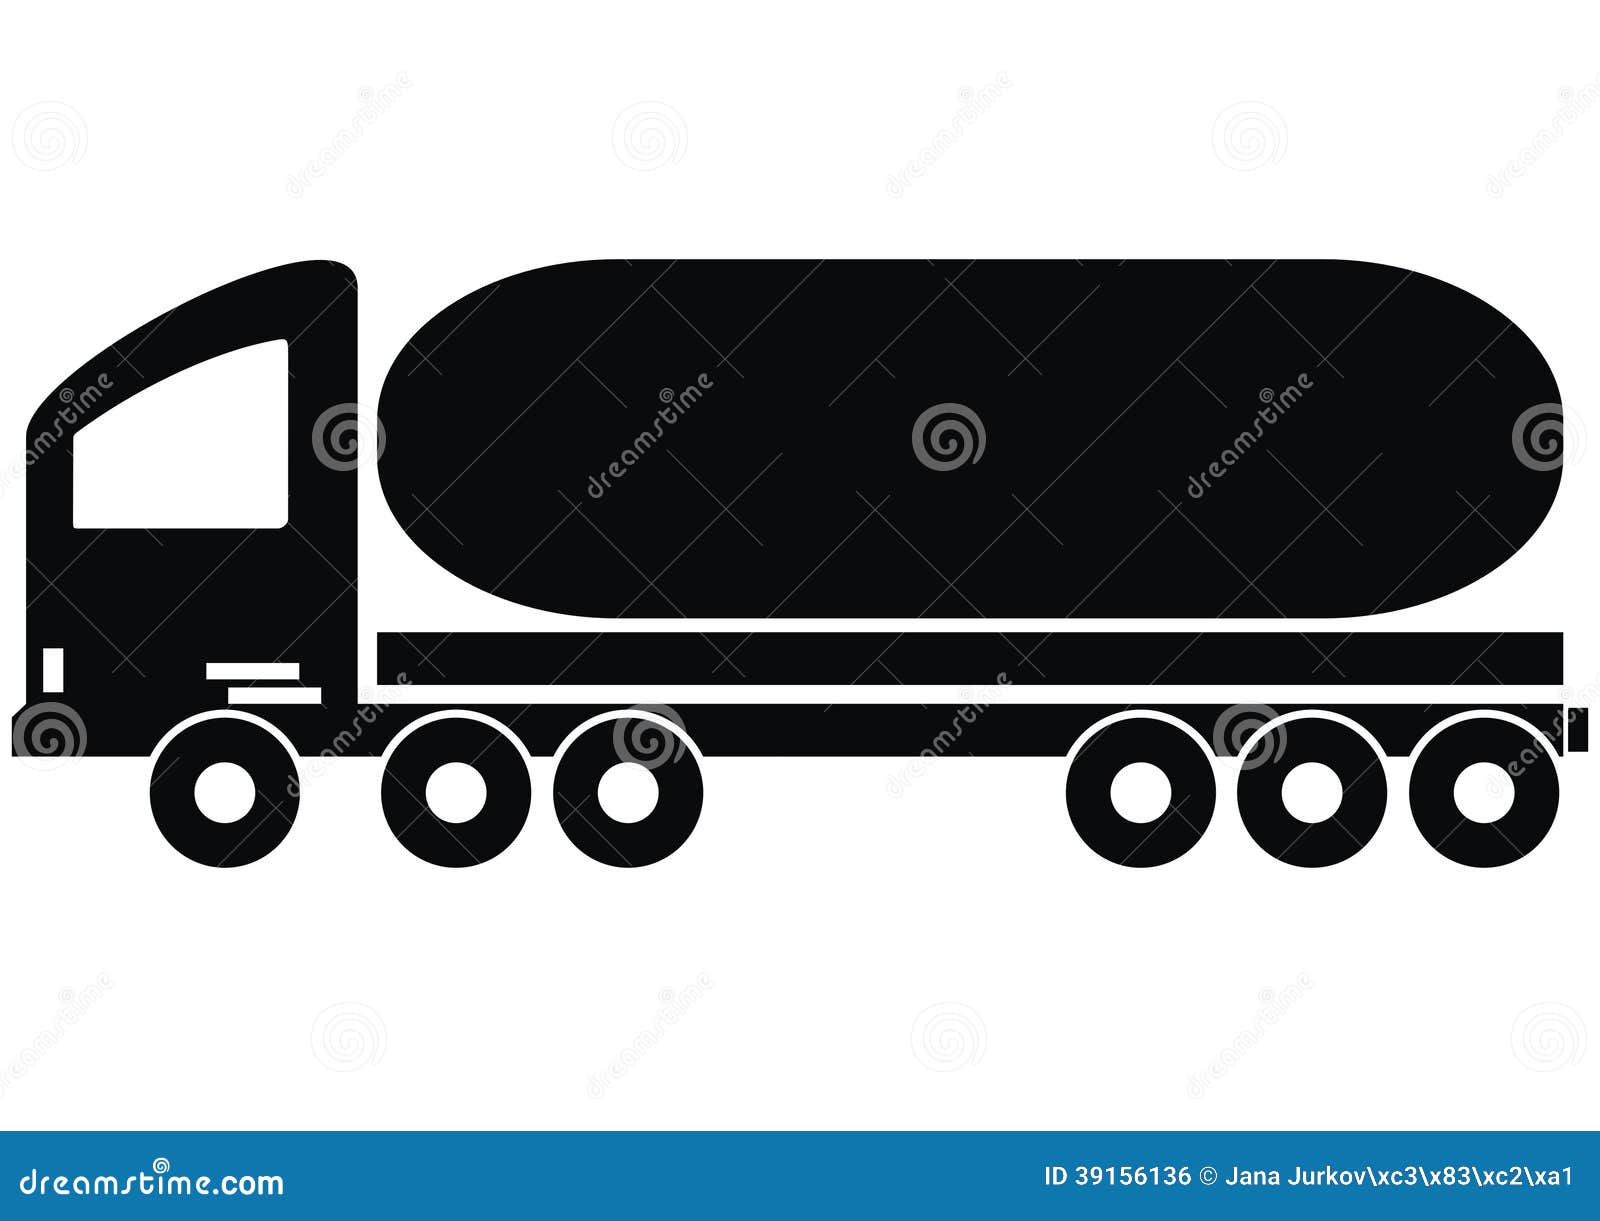 American lorry silhouette stock vector. Illustration of shipping - 40635879